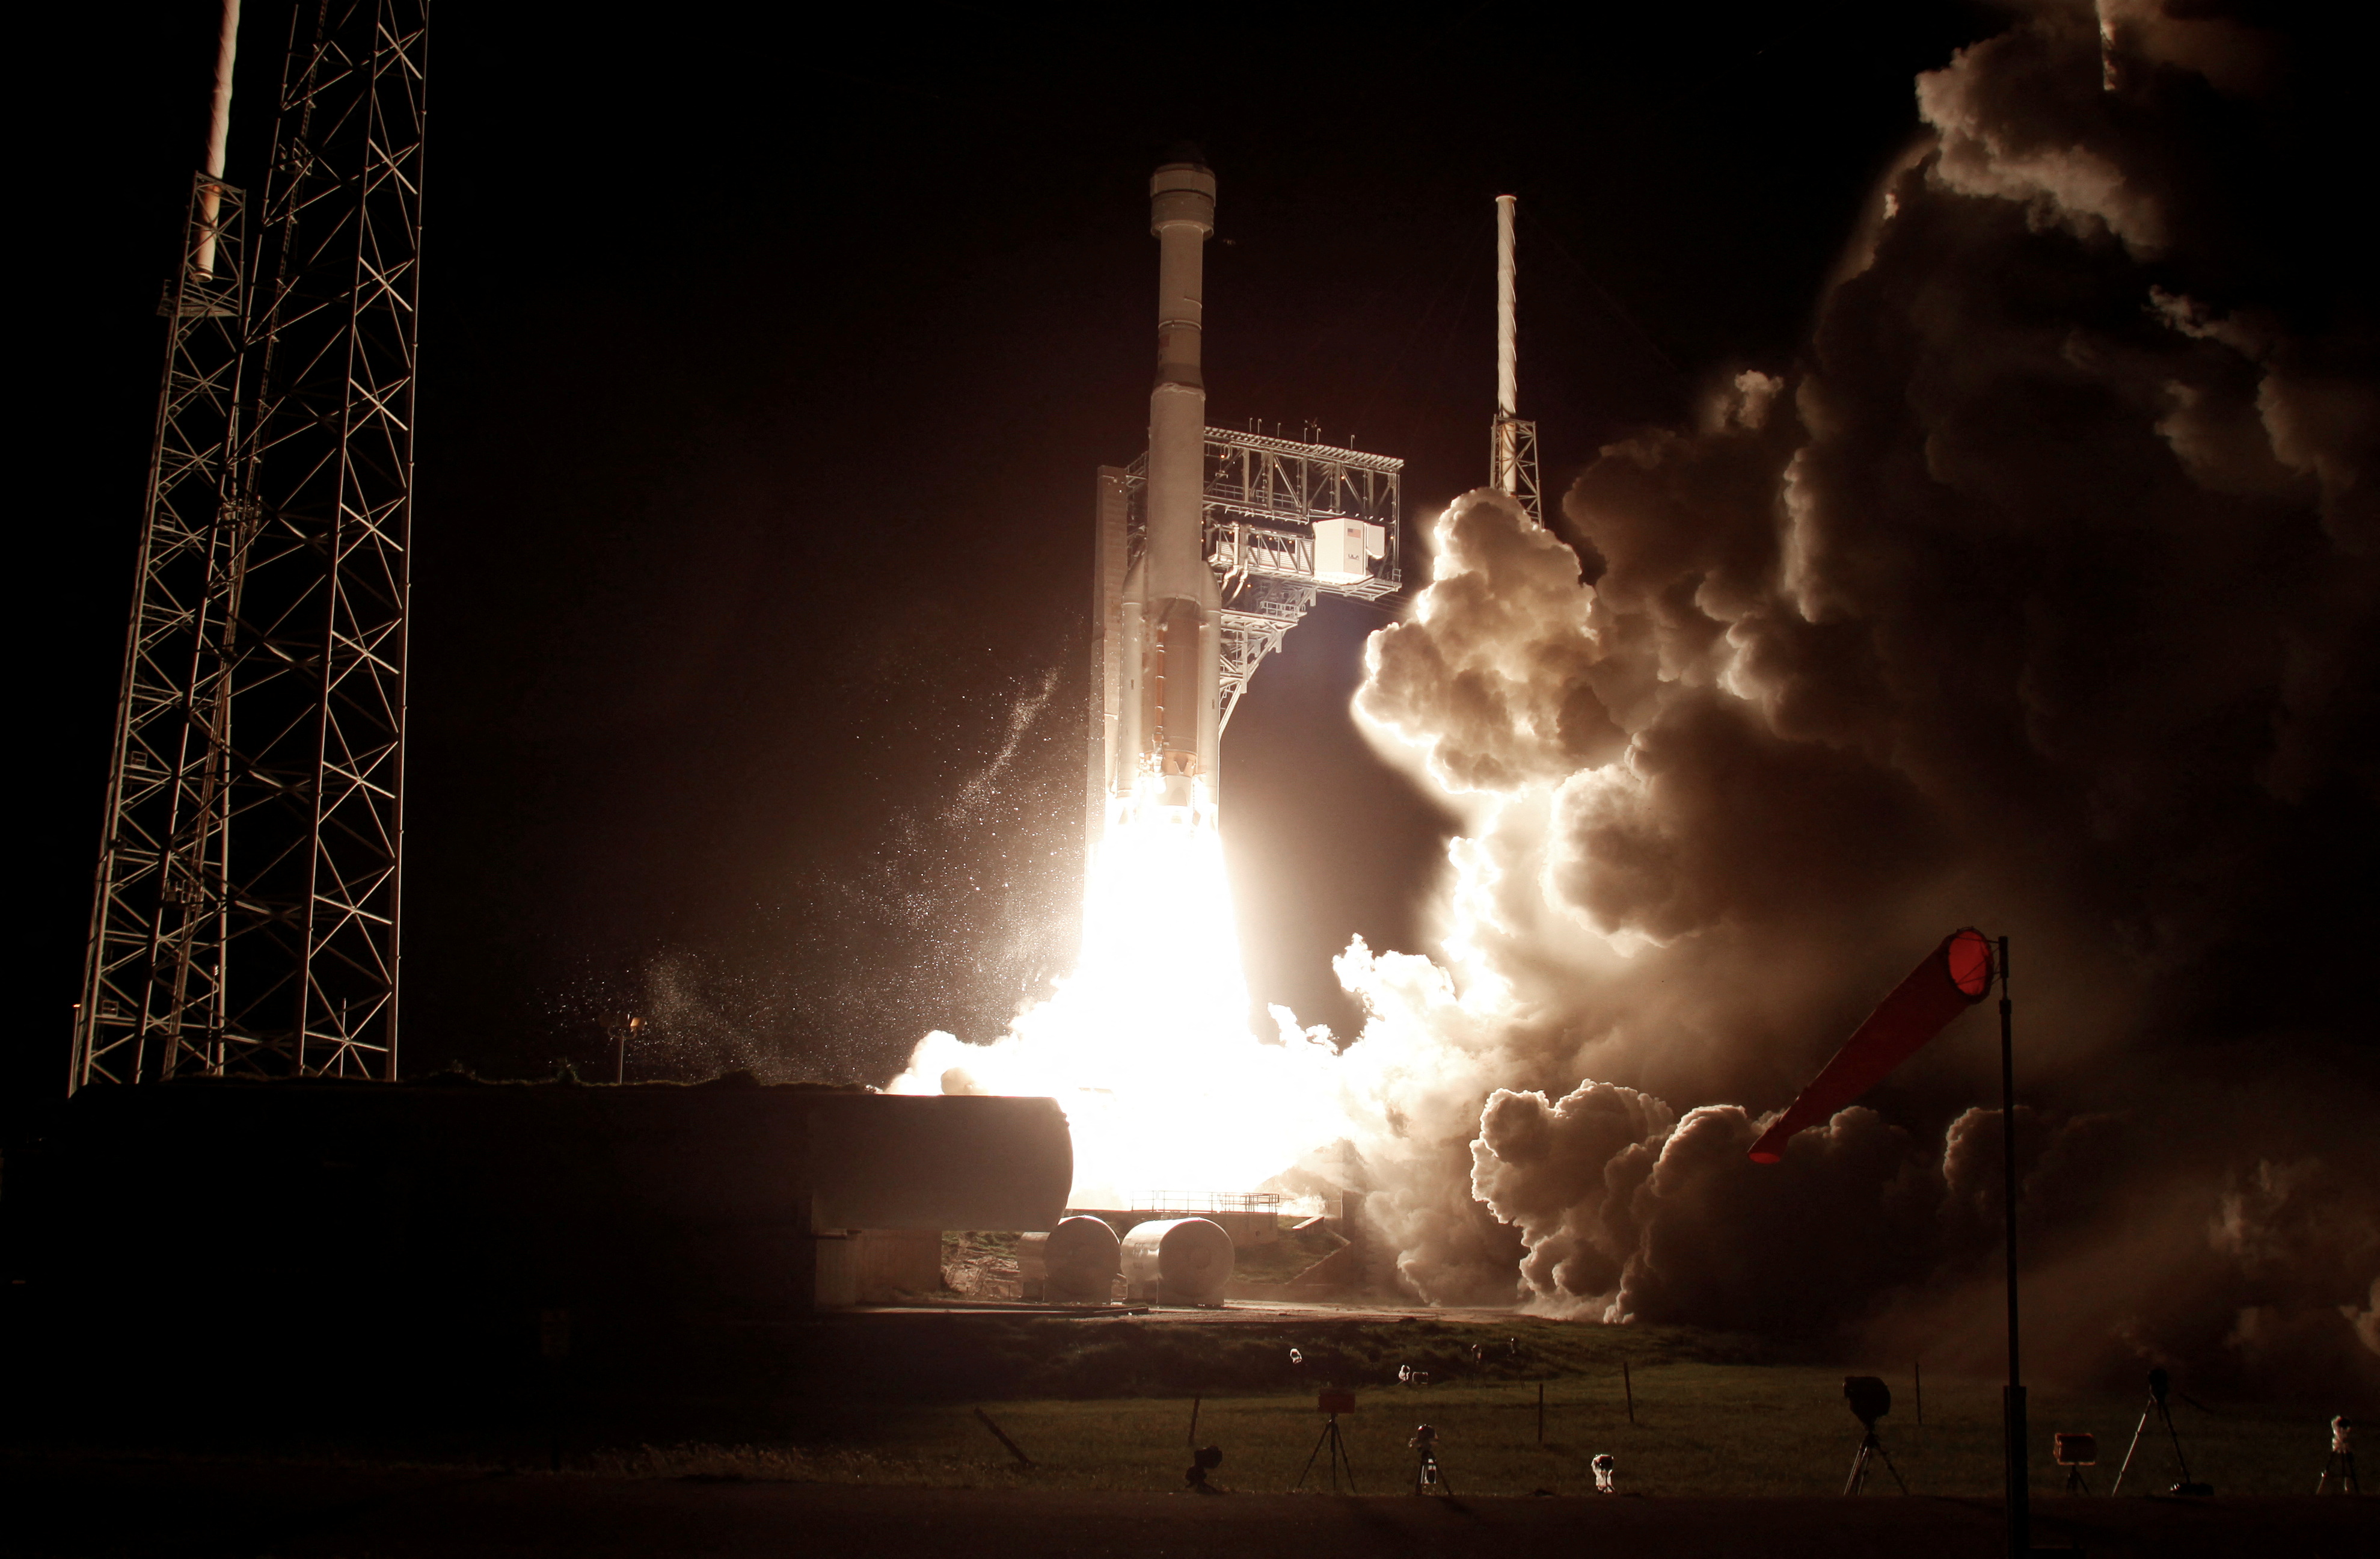 The Boeing CST-100 Starliner spacecraft, atop a ULA Atlas V rocket, lifts off for an uncrewed Orbital Flight Test to the International Space Station